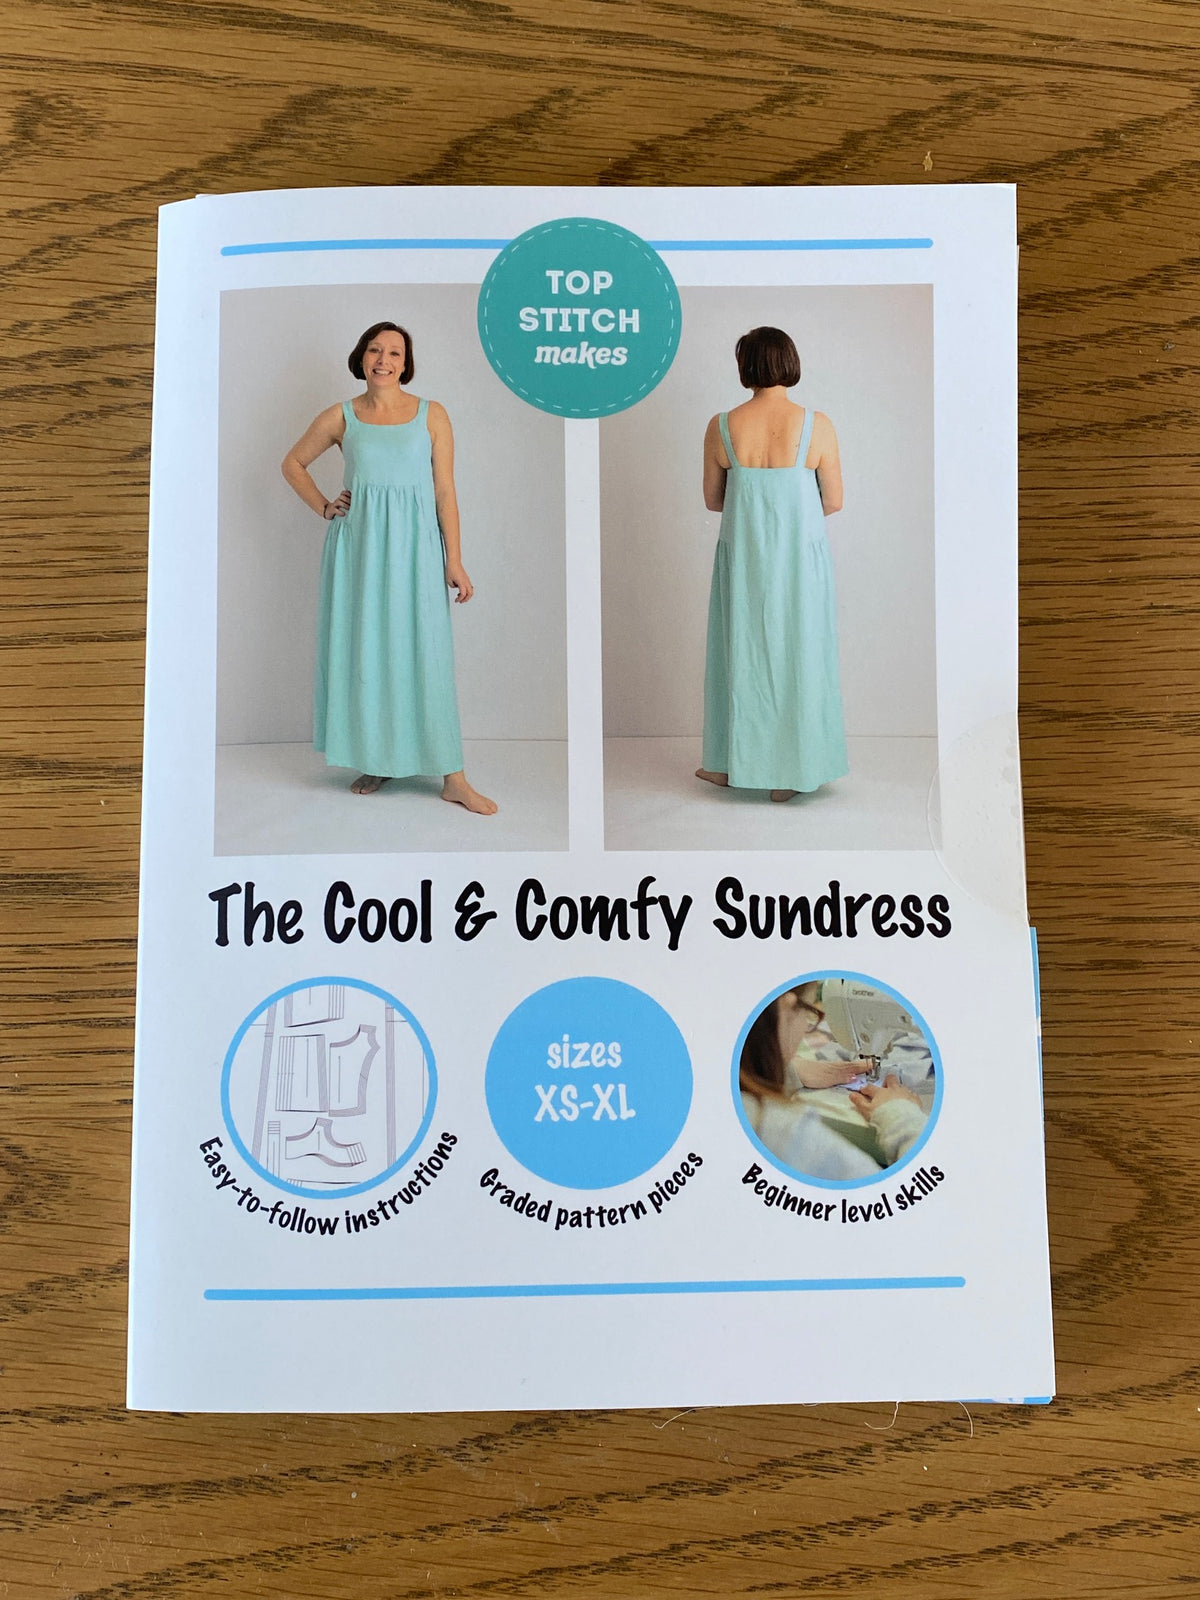 Top Stitch Makes - The Cool & Comfy Sundress